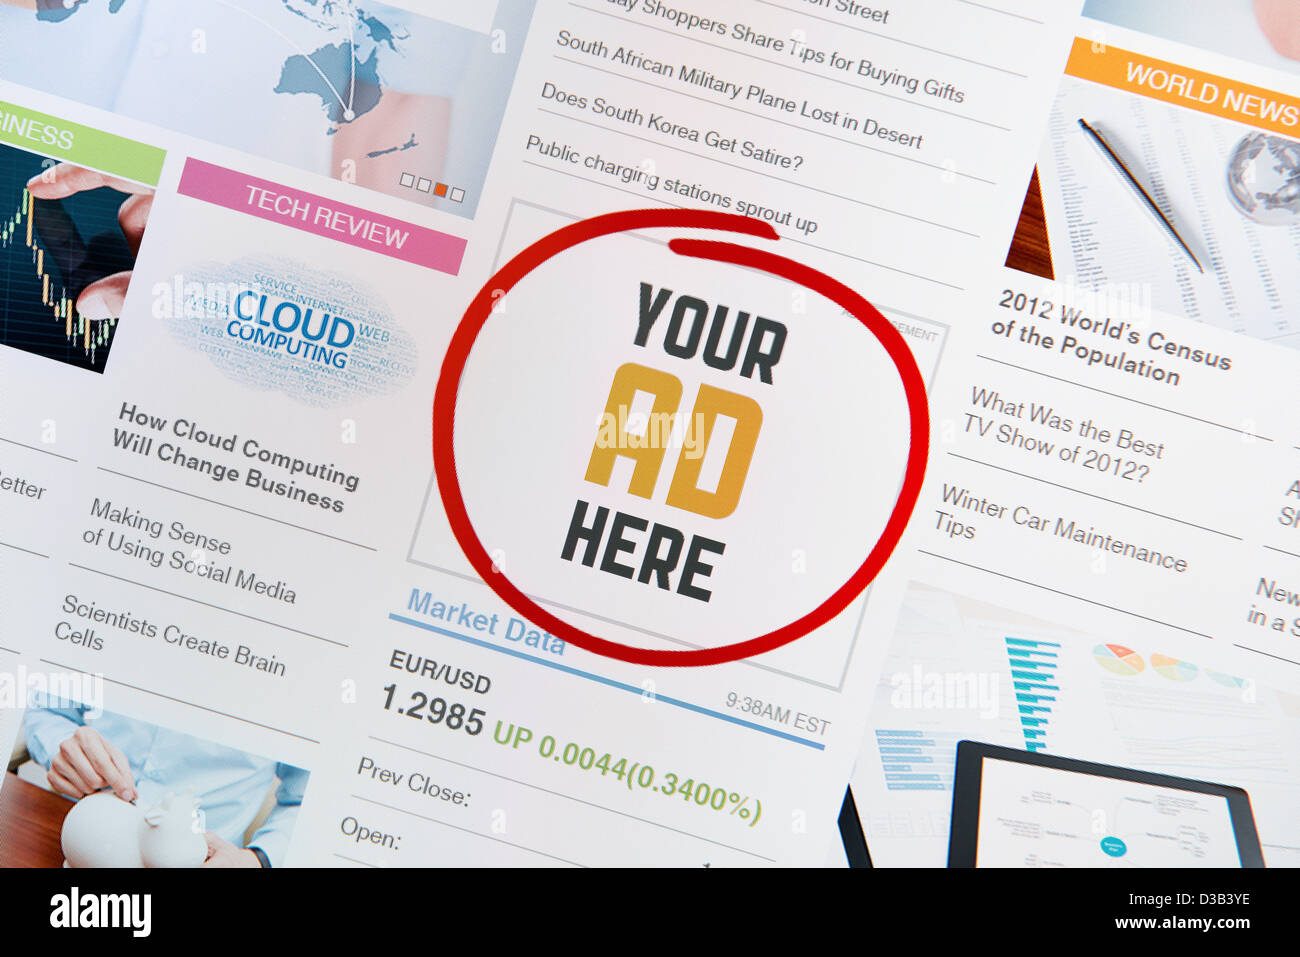 Online internet banner with text 'YOUR AD HERE' on a web page. Stock Photo